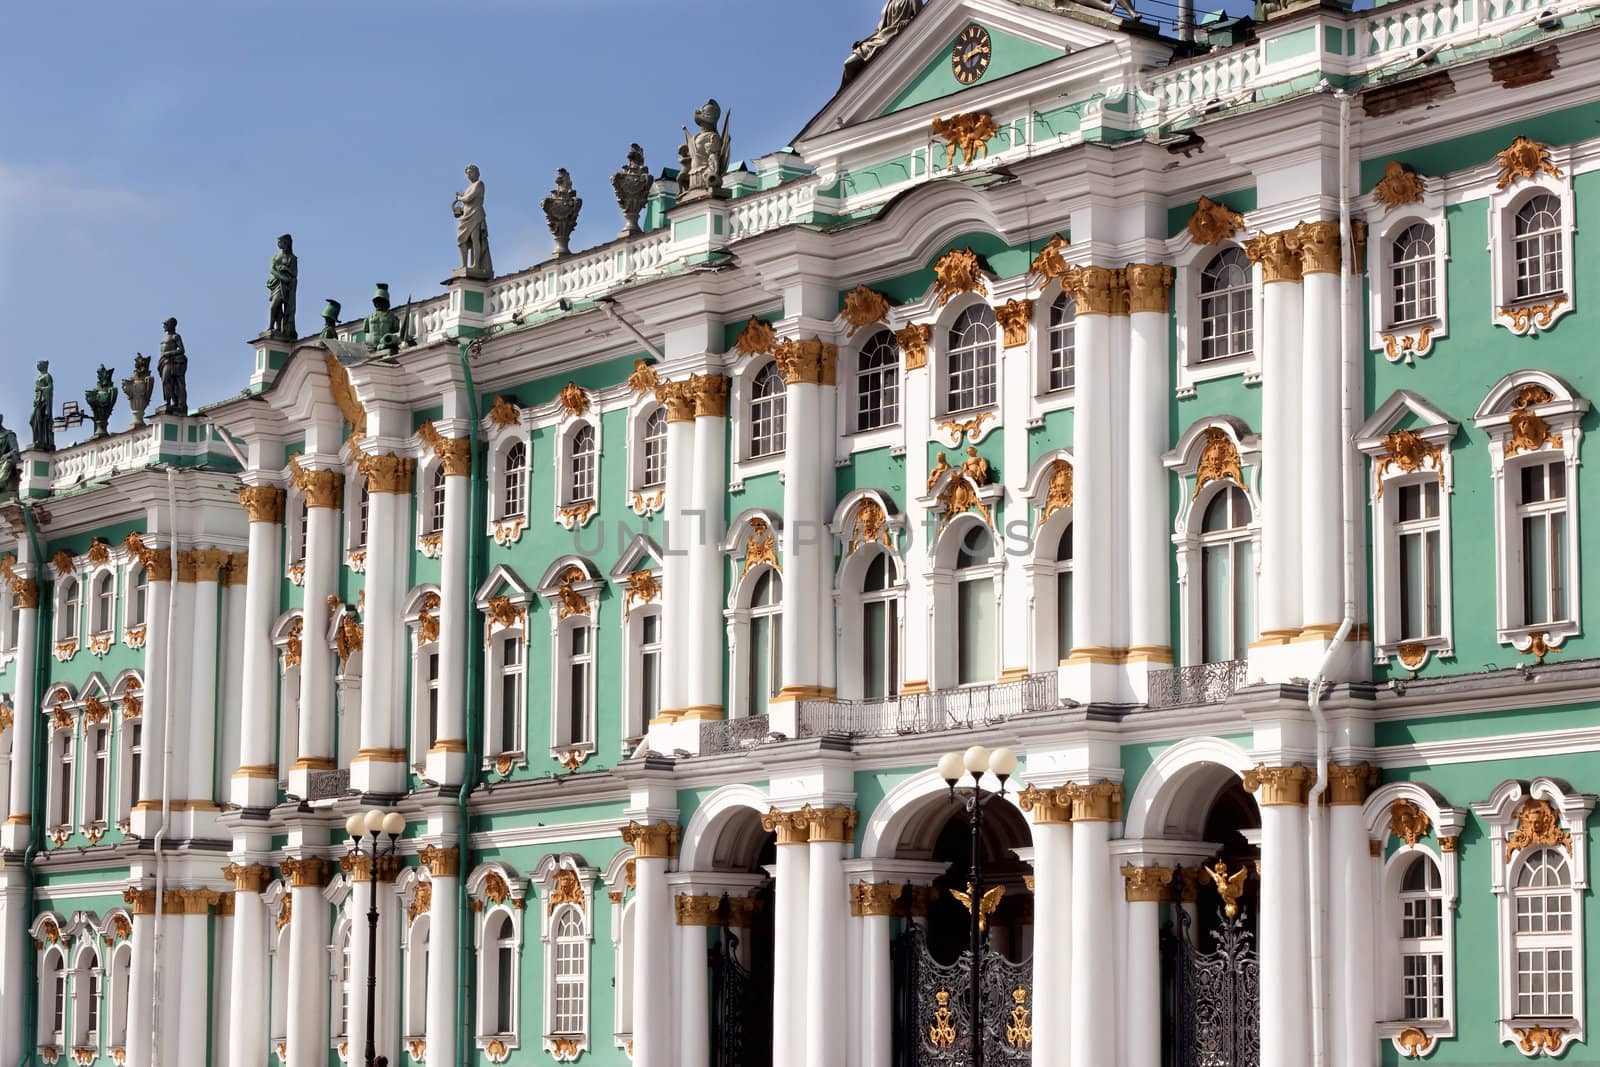 Winter Palace on Palace Square in St. Petersburg, Russia